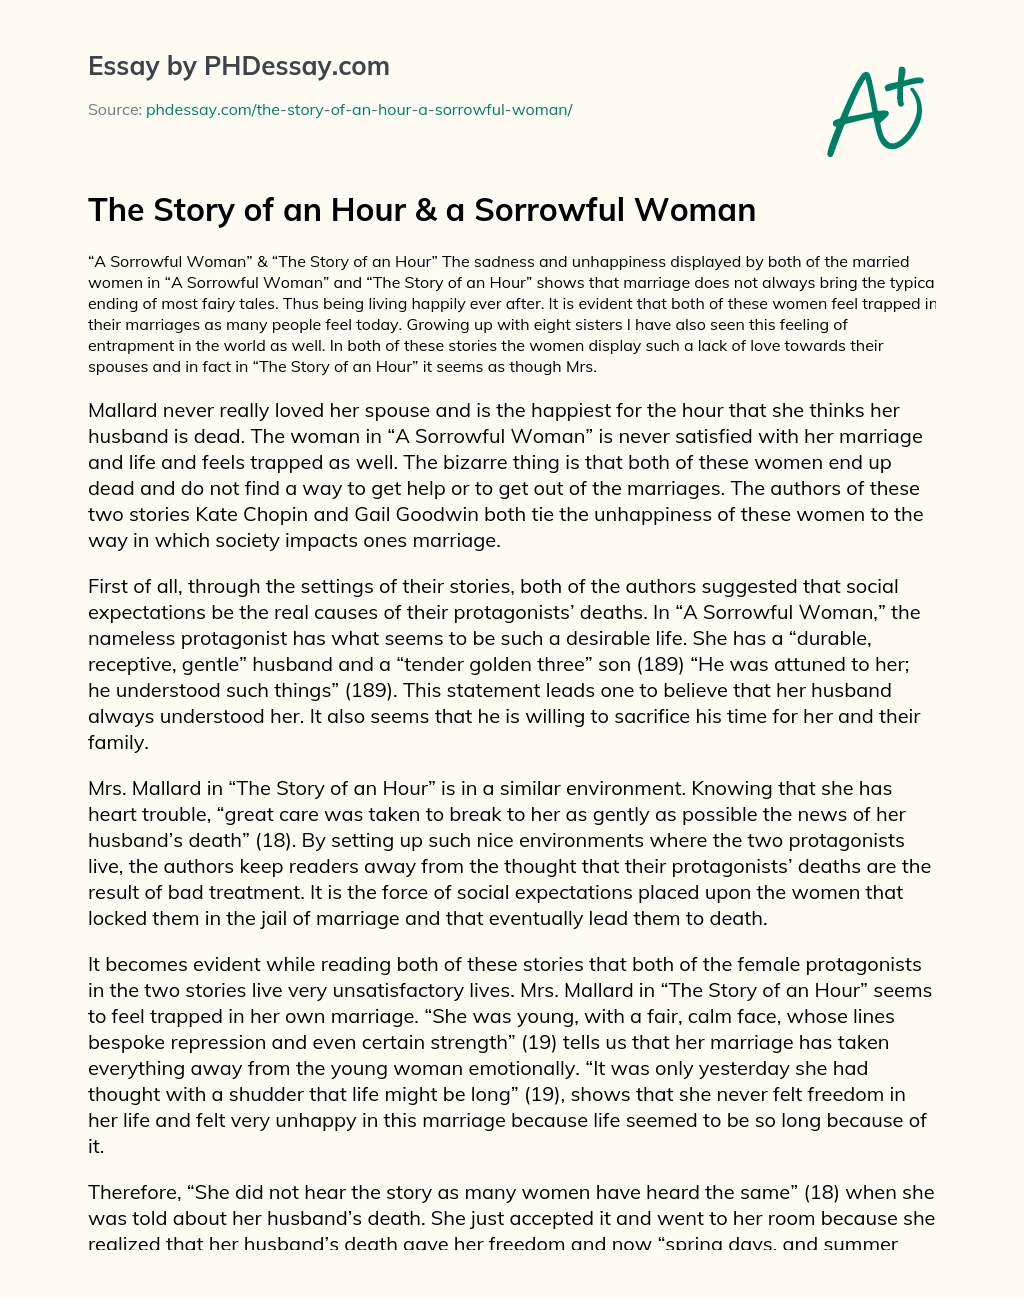 The Story of an Hour & a Sorrowful Woman essay